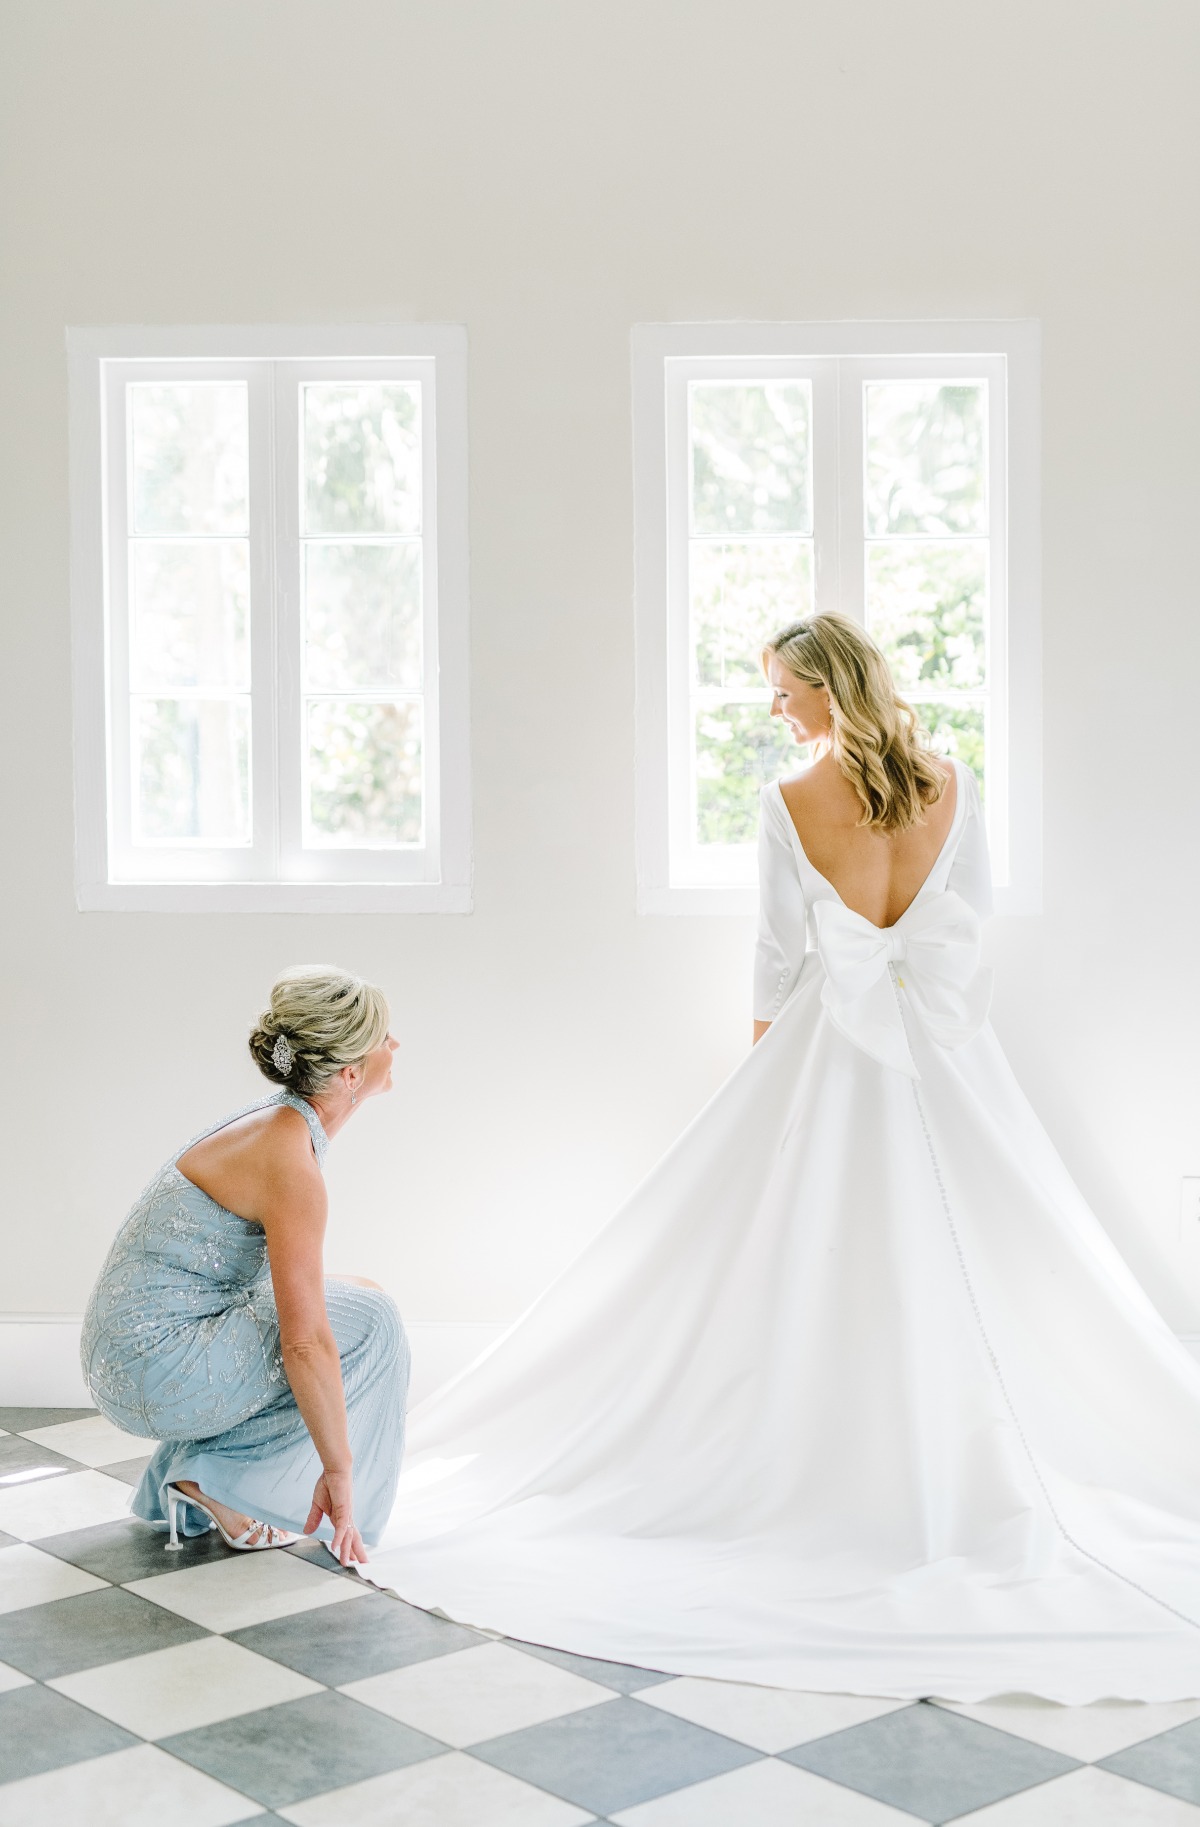 A Charleston Wedding That Dares To Be Timeless In These Trendy Times